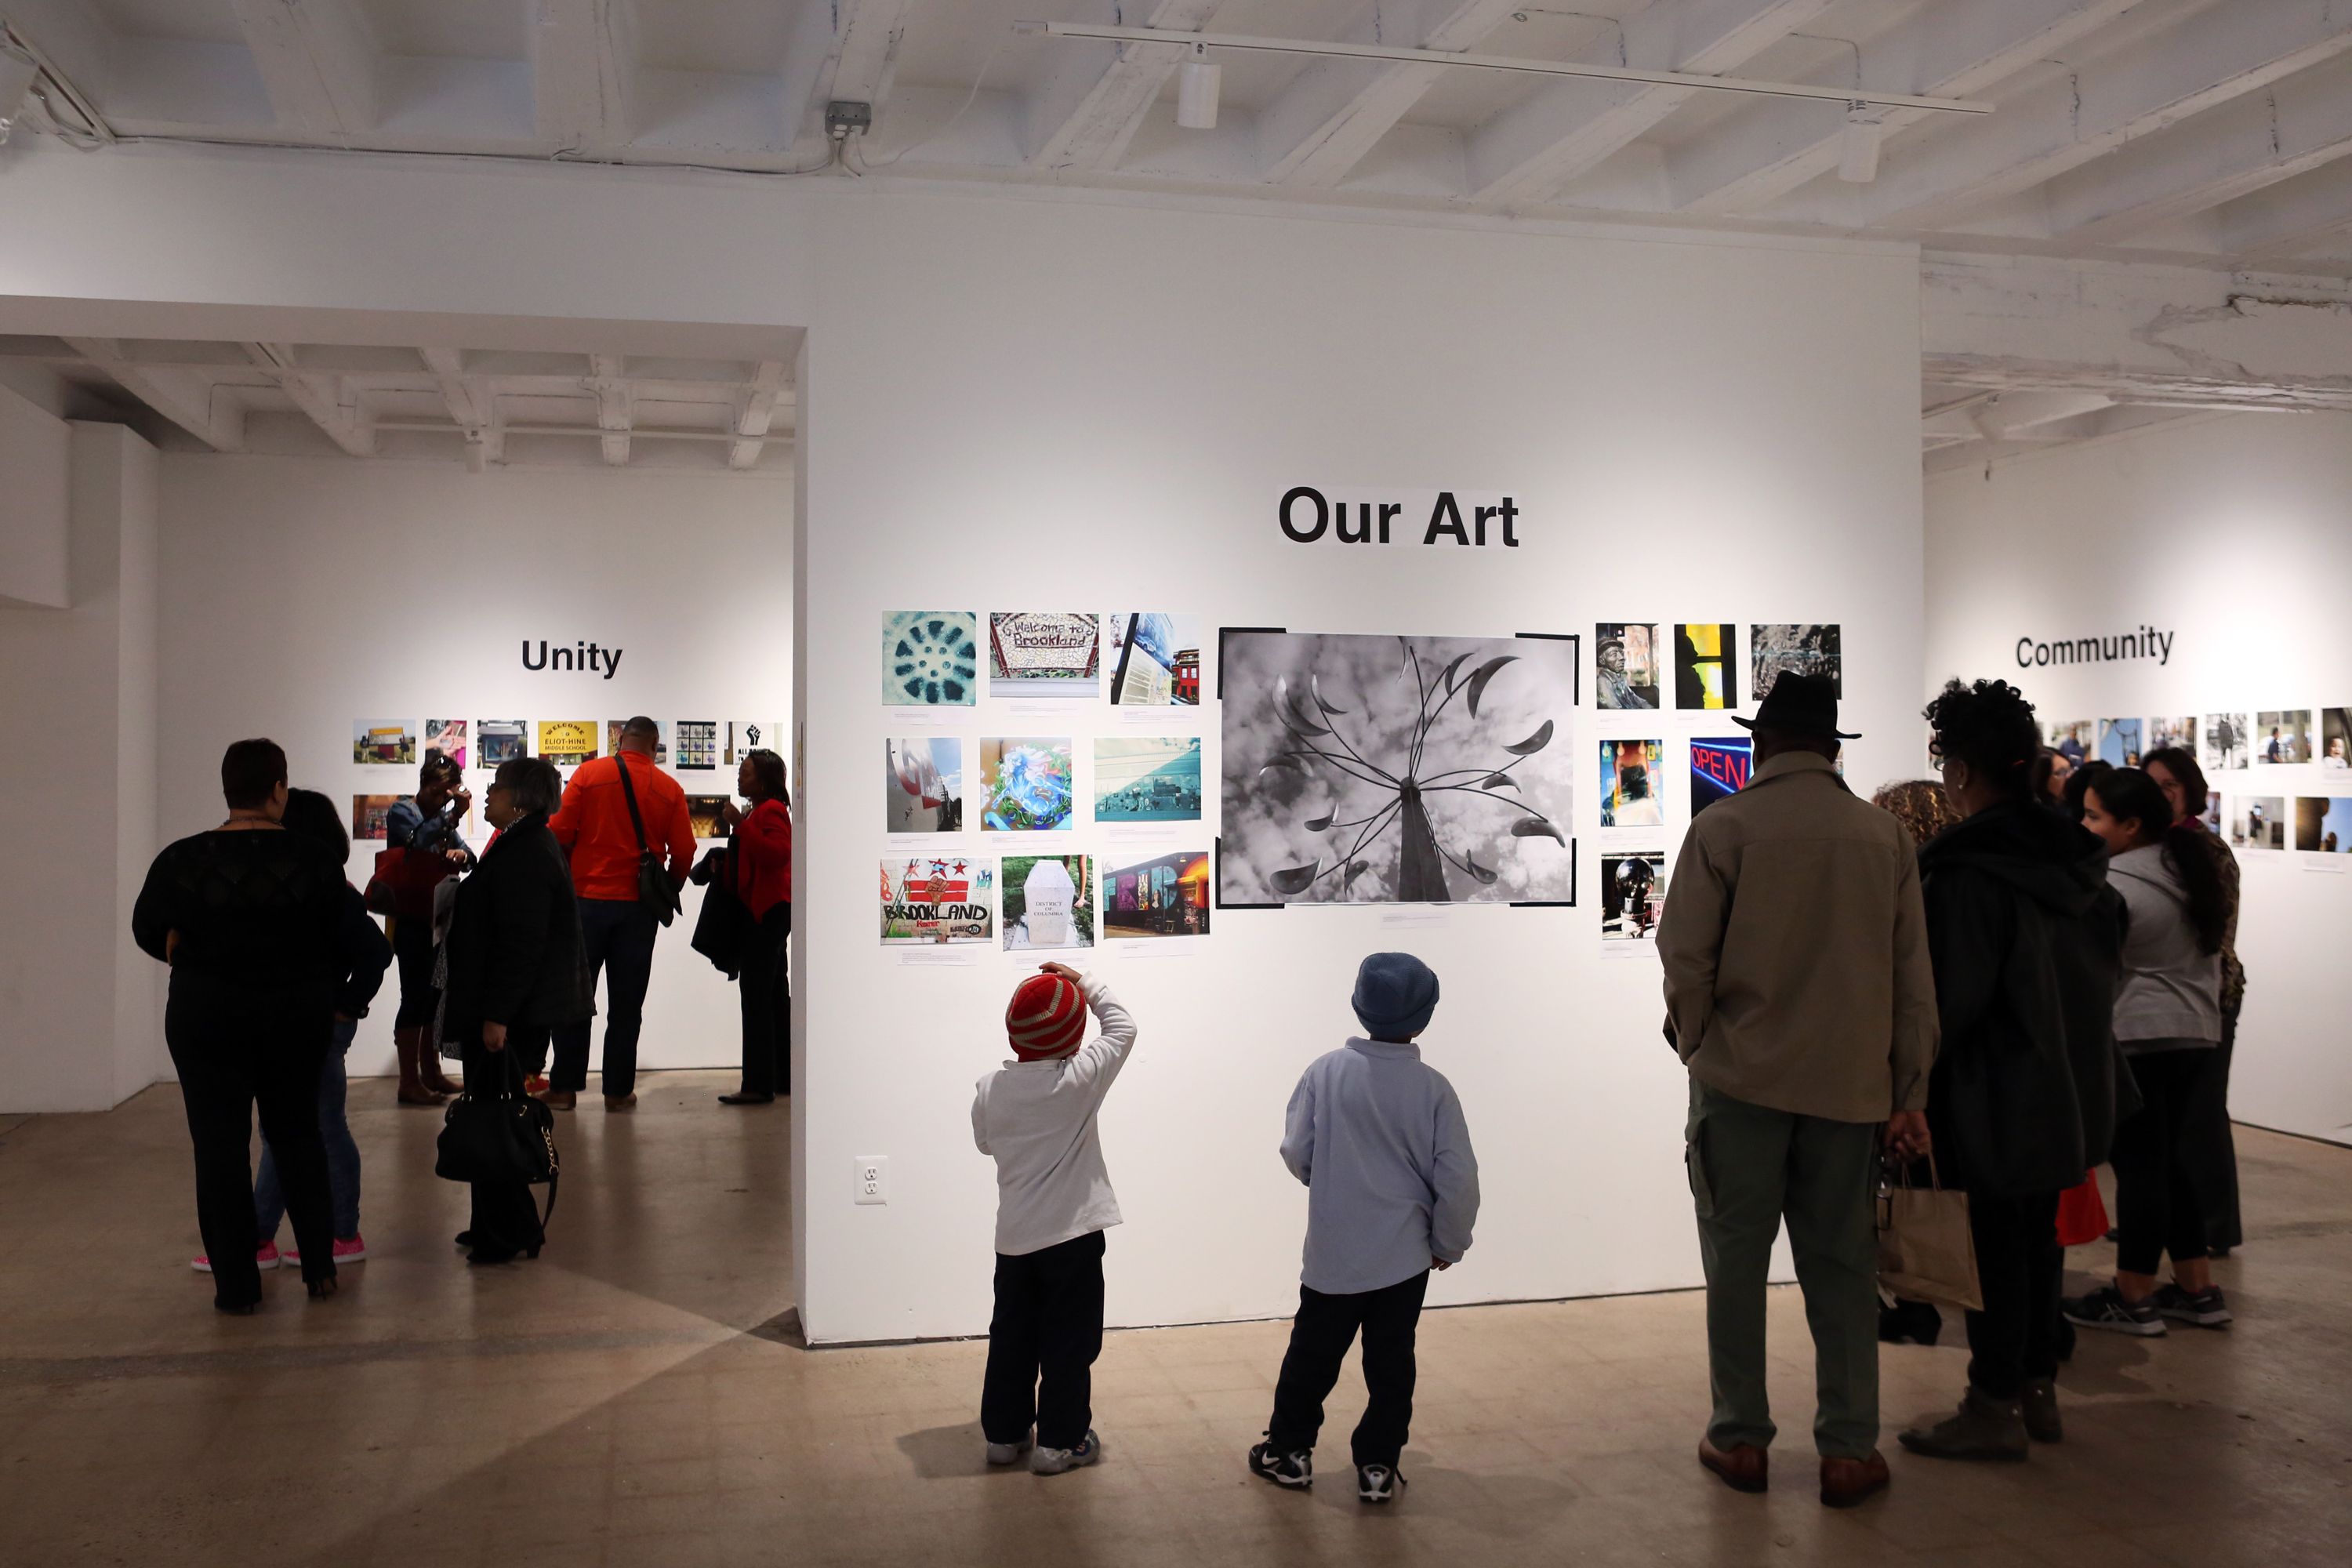 Public visitors and families of students observing the various aspects of DC at the exhibition. Image by Evey Wilson. United States, 2017.